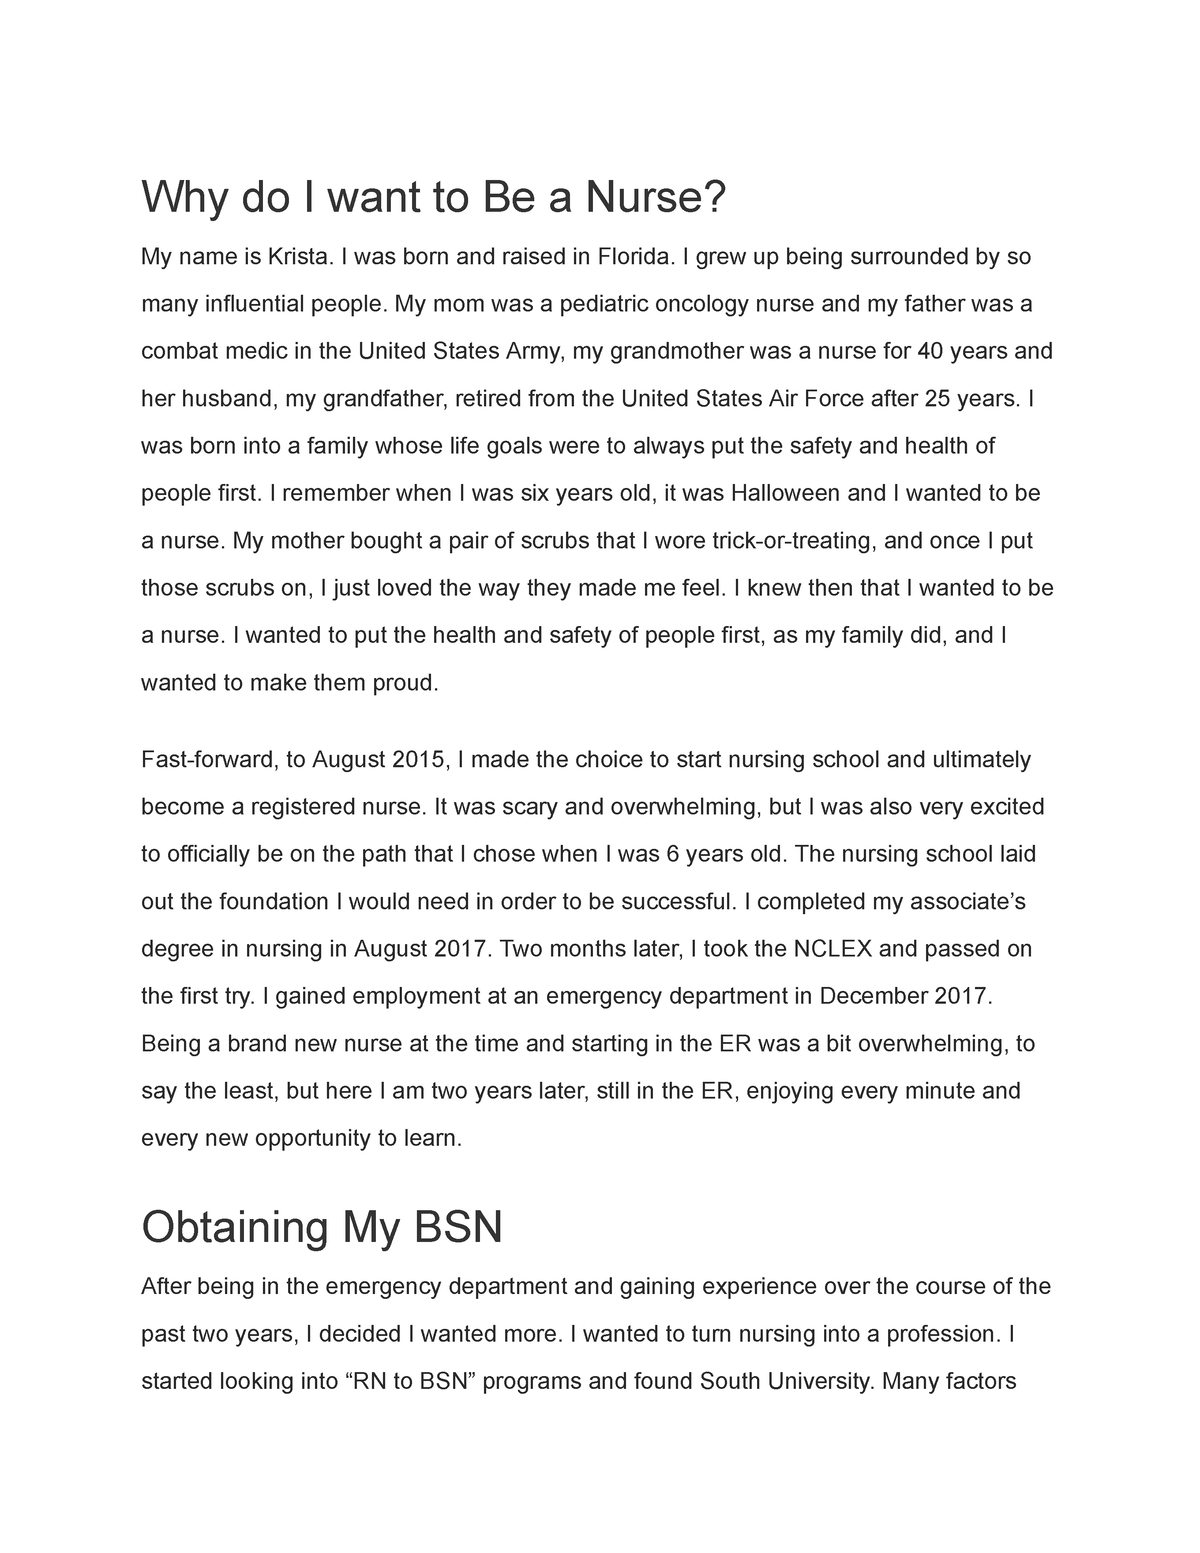 sample essay why i want to be a nurse practitioner